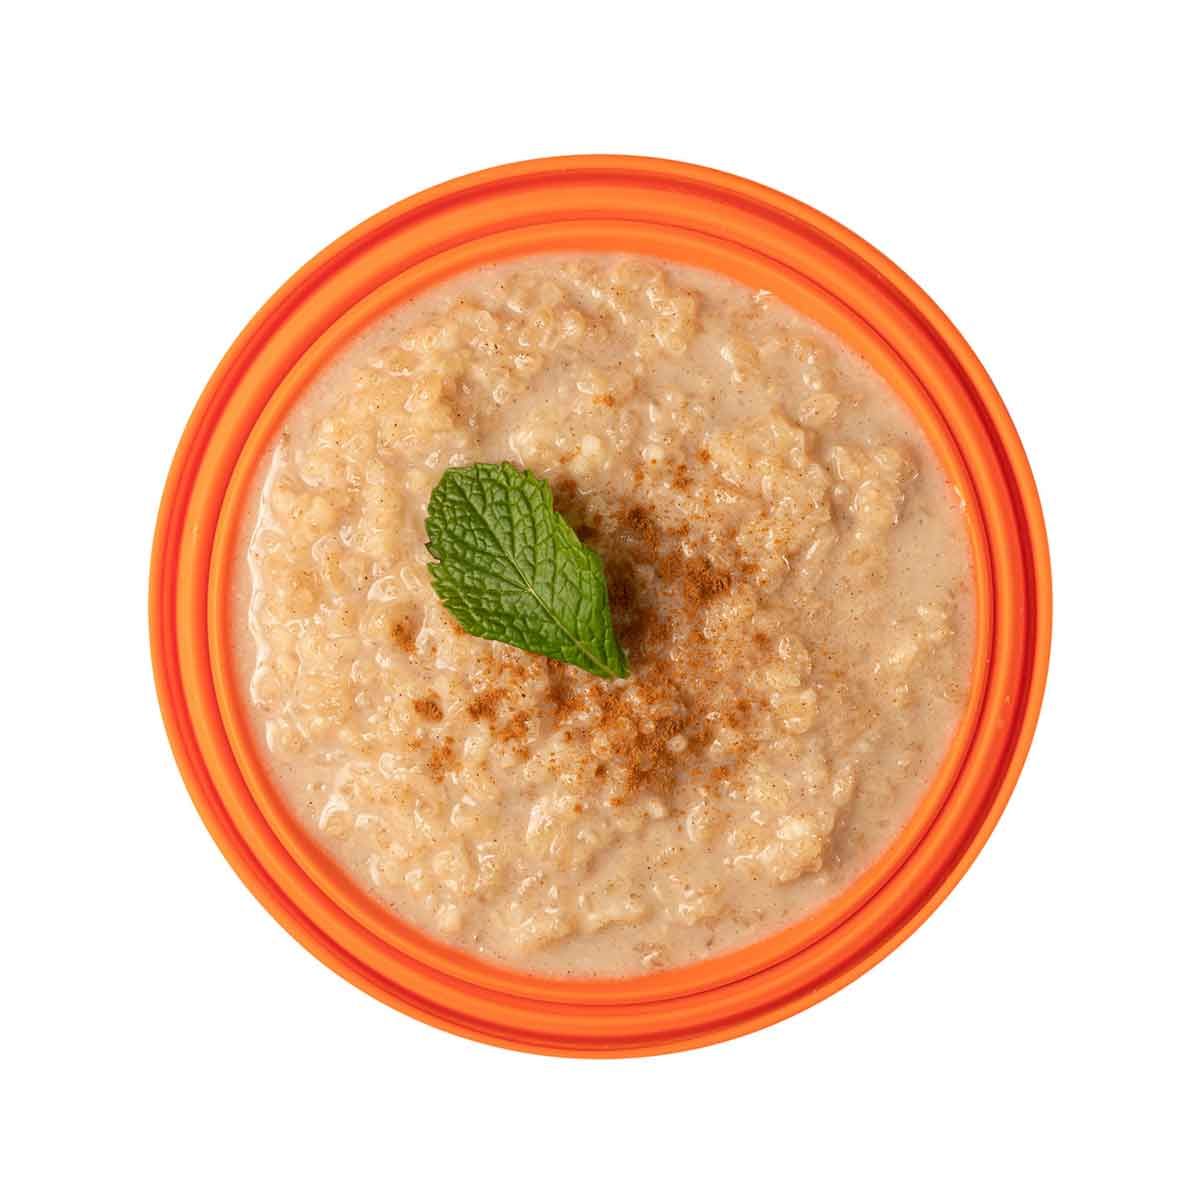 Expedition Foods Rice pudding with cinnamon